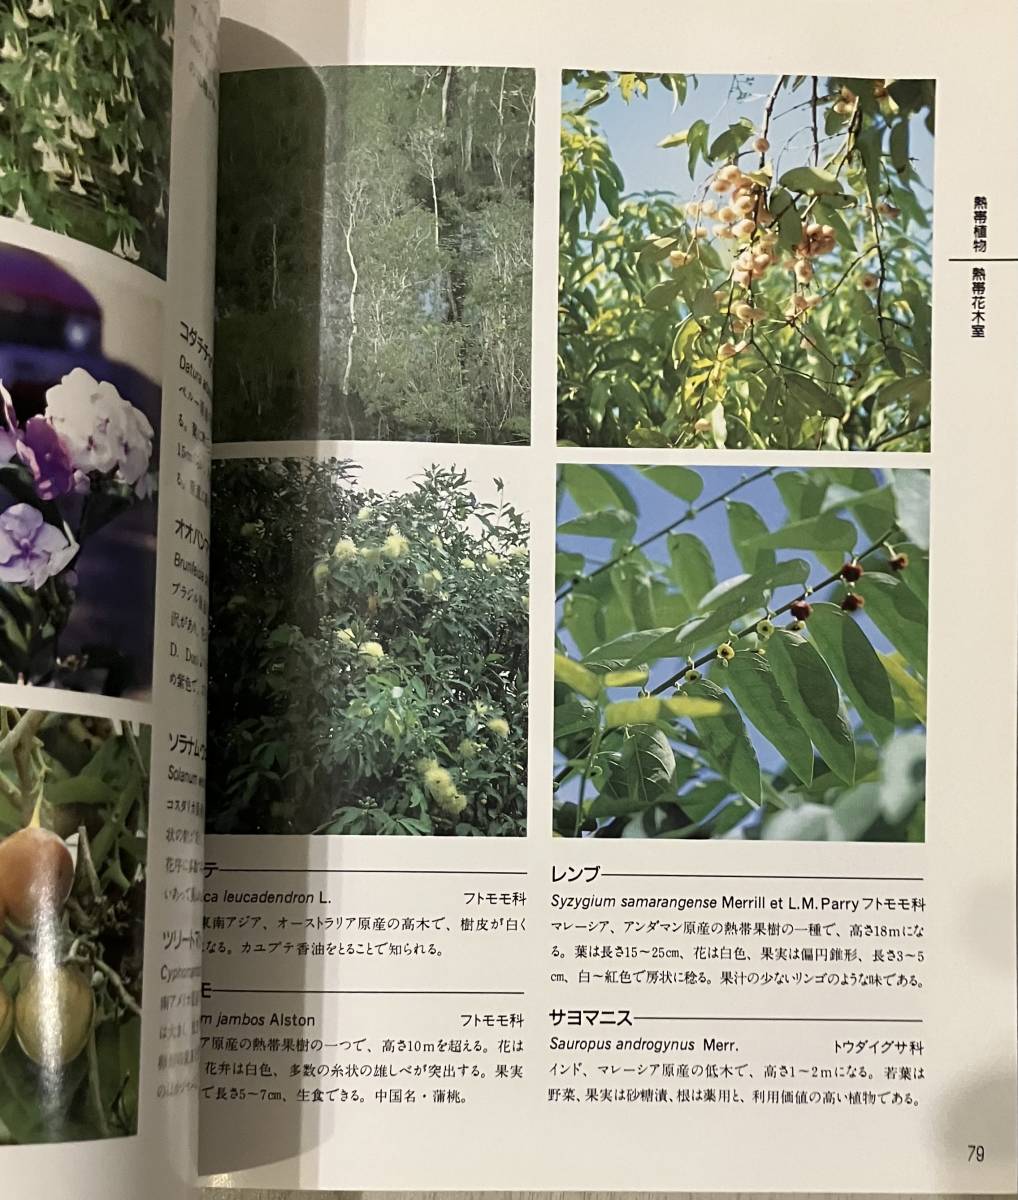 ... that flower pavilion guidebook international flower . green. . viewing .1990 year . obi plant / cactus * succulent plant / height mountain * ultimate ground plant / medicine for plant 